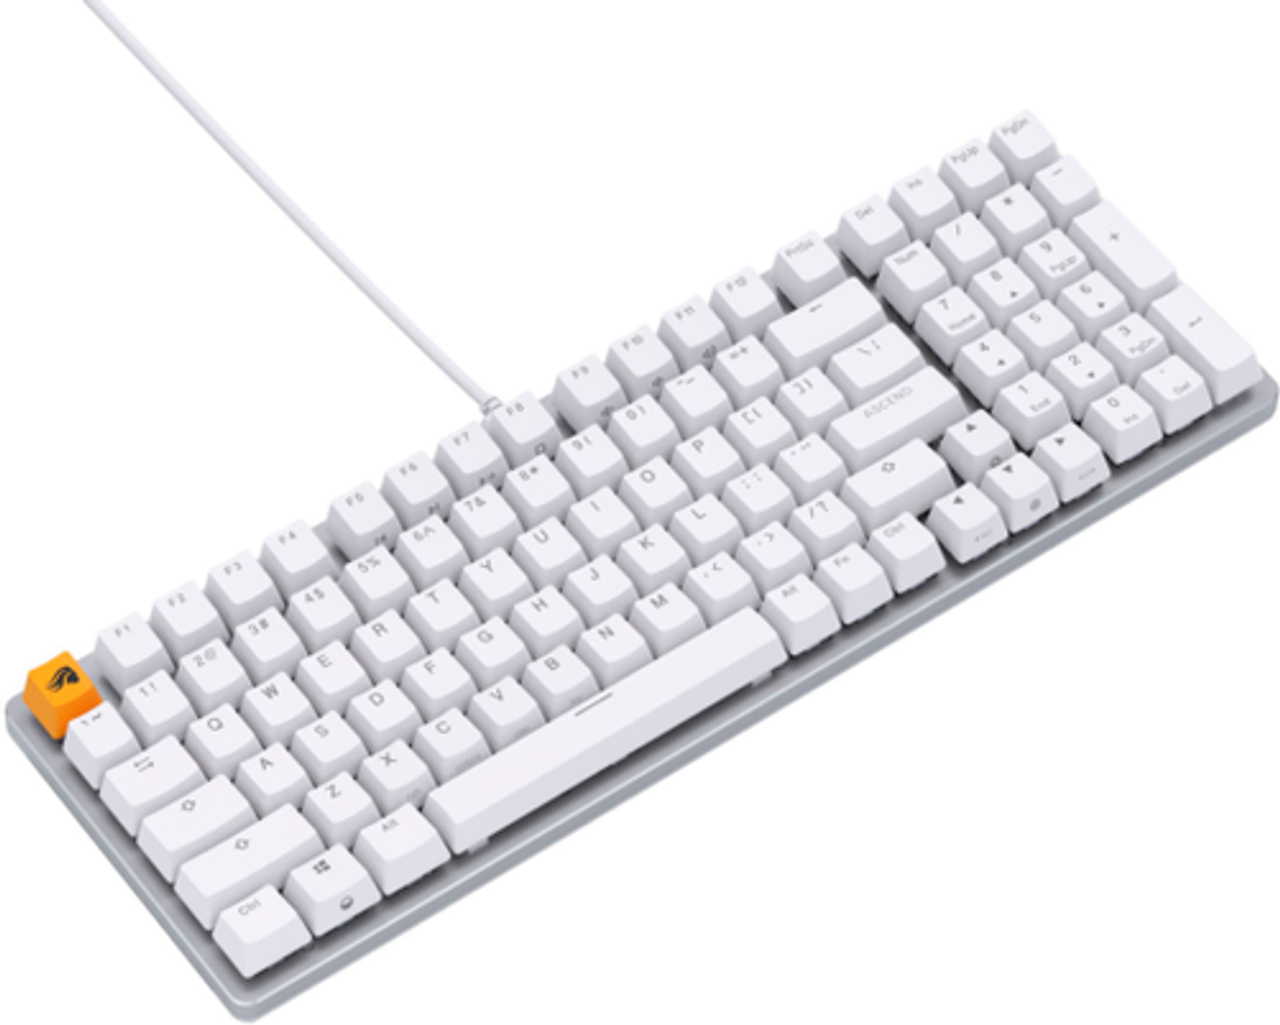 Glorious - GMMK 2 Prebuilt 96% Full Size Wired  Mechanical Linear Switch Gaming Keyboard with Hotswappable Switches - White